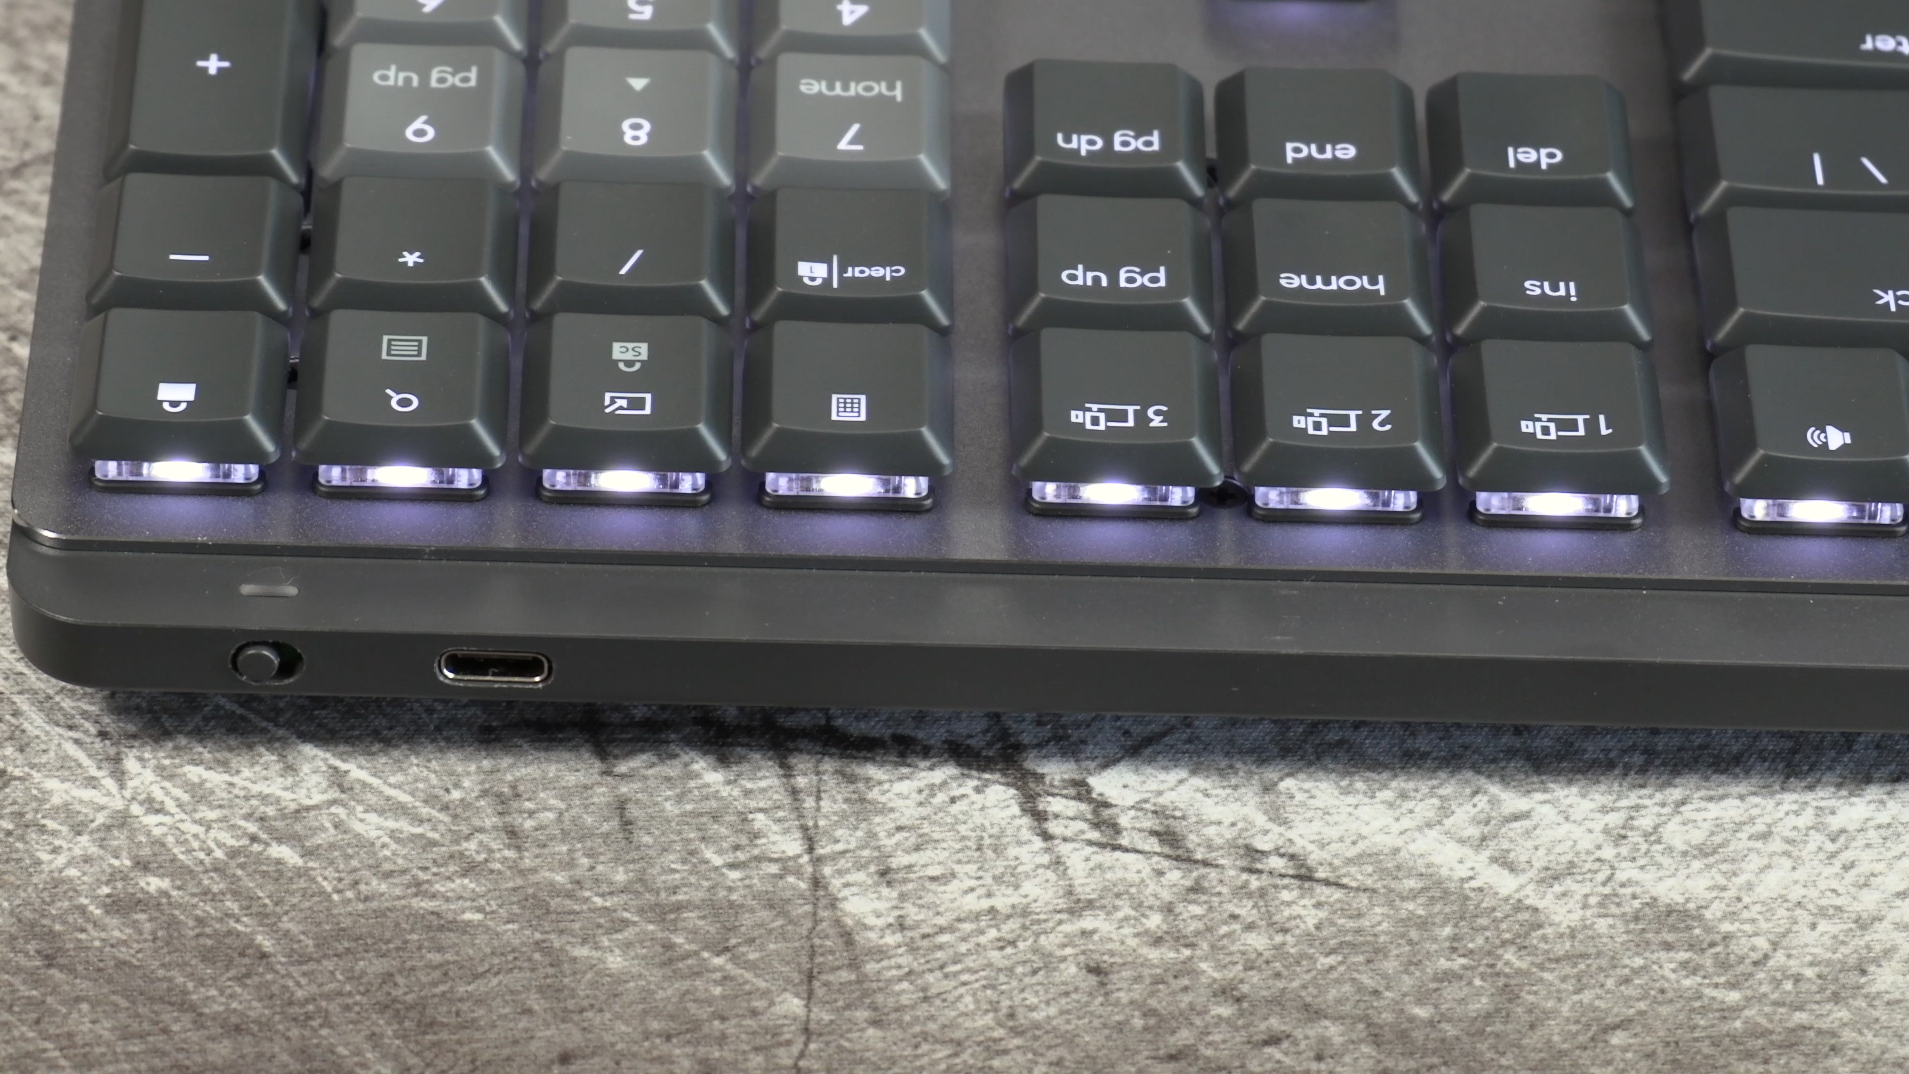 Logitech MX Mechanical: A gaming keyboard for work without all the RGB